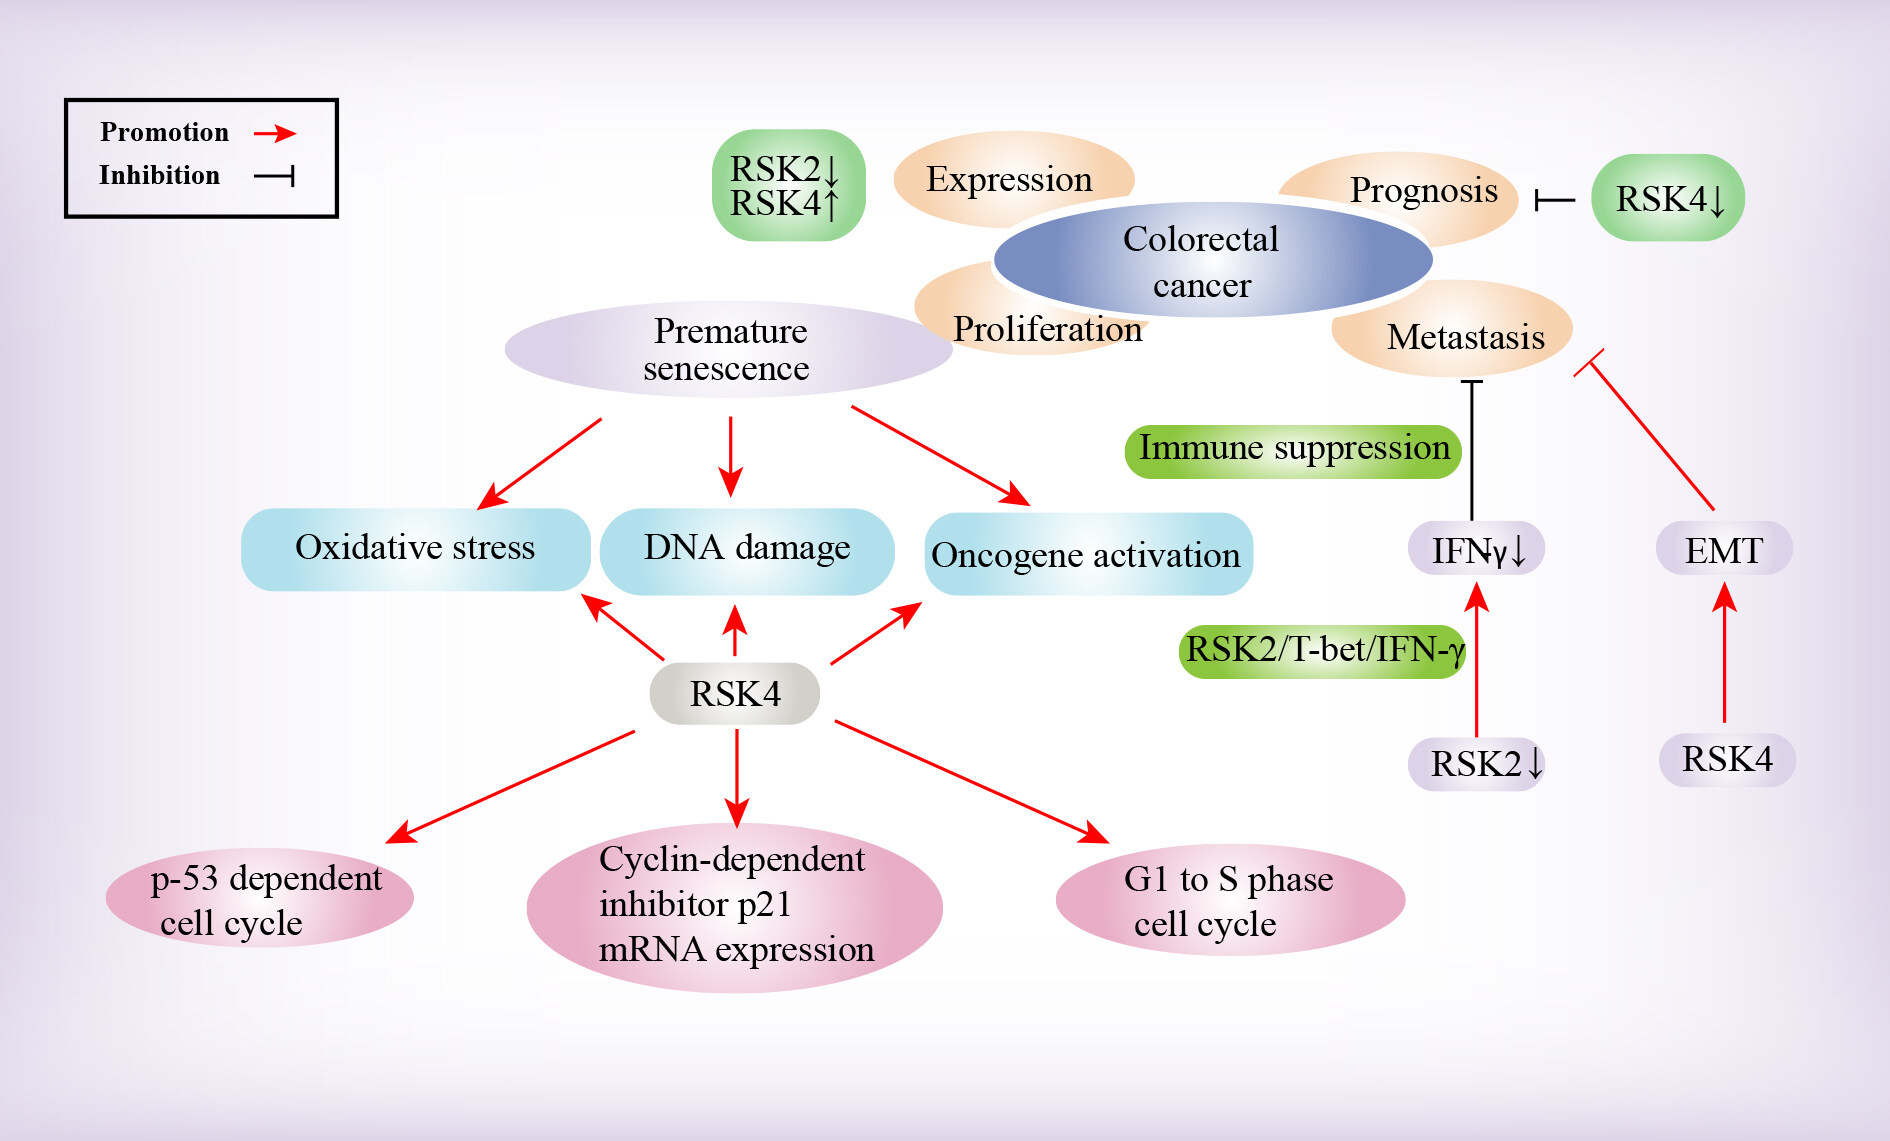 Regulation and function of the RSK family in colorectal cancer